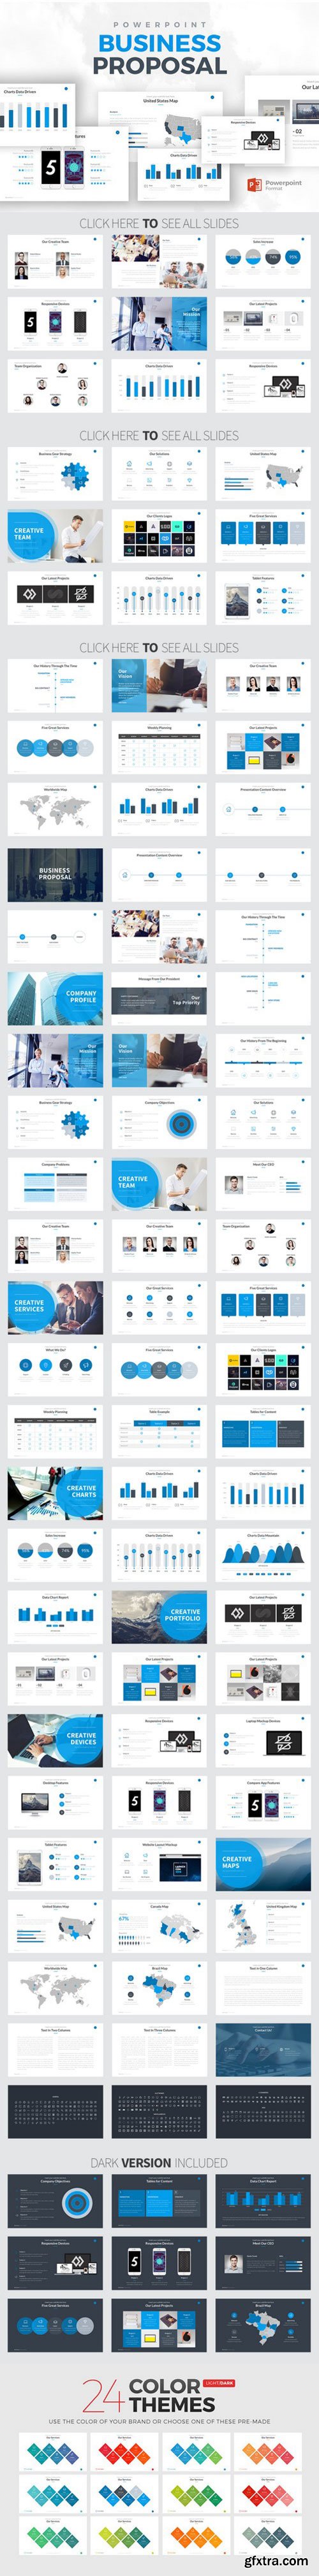 CM - Business Proposal PowerPoint 575444